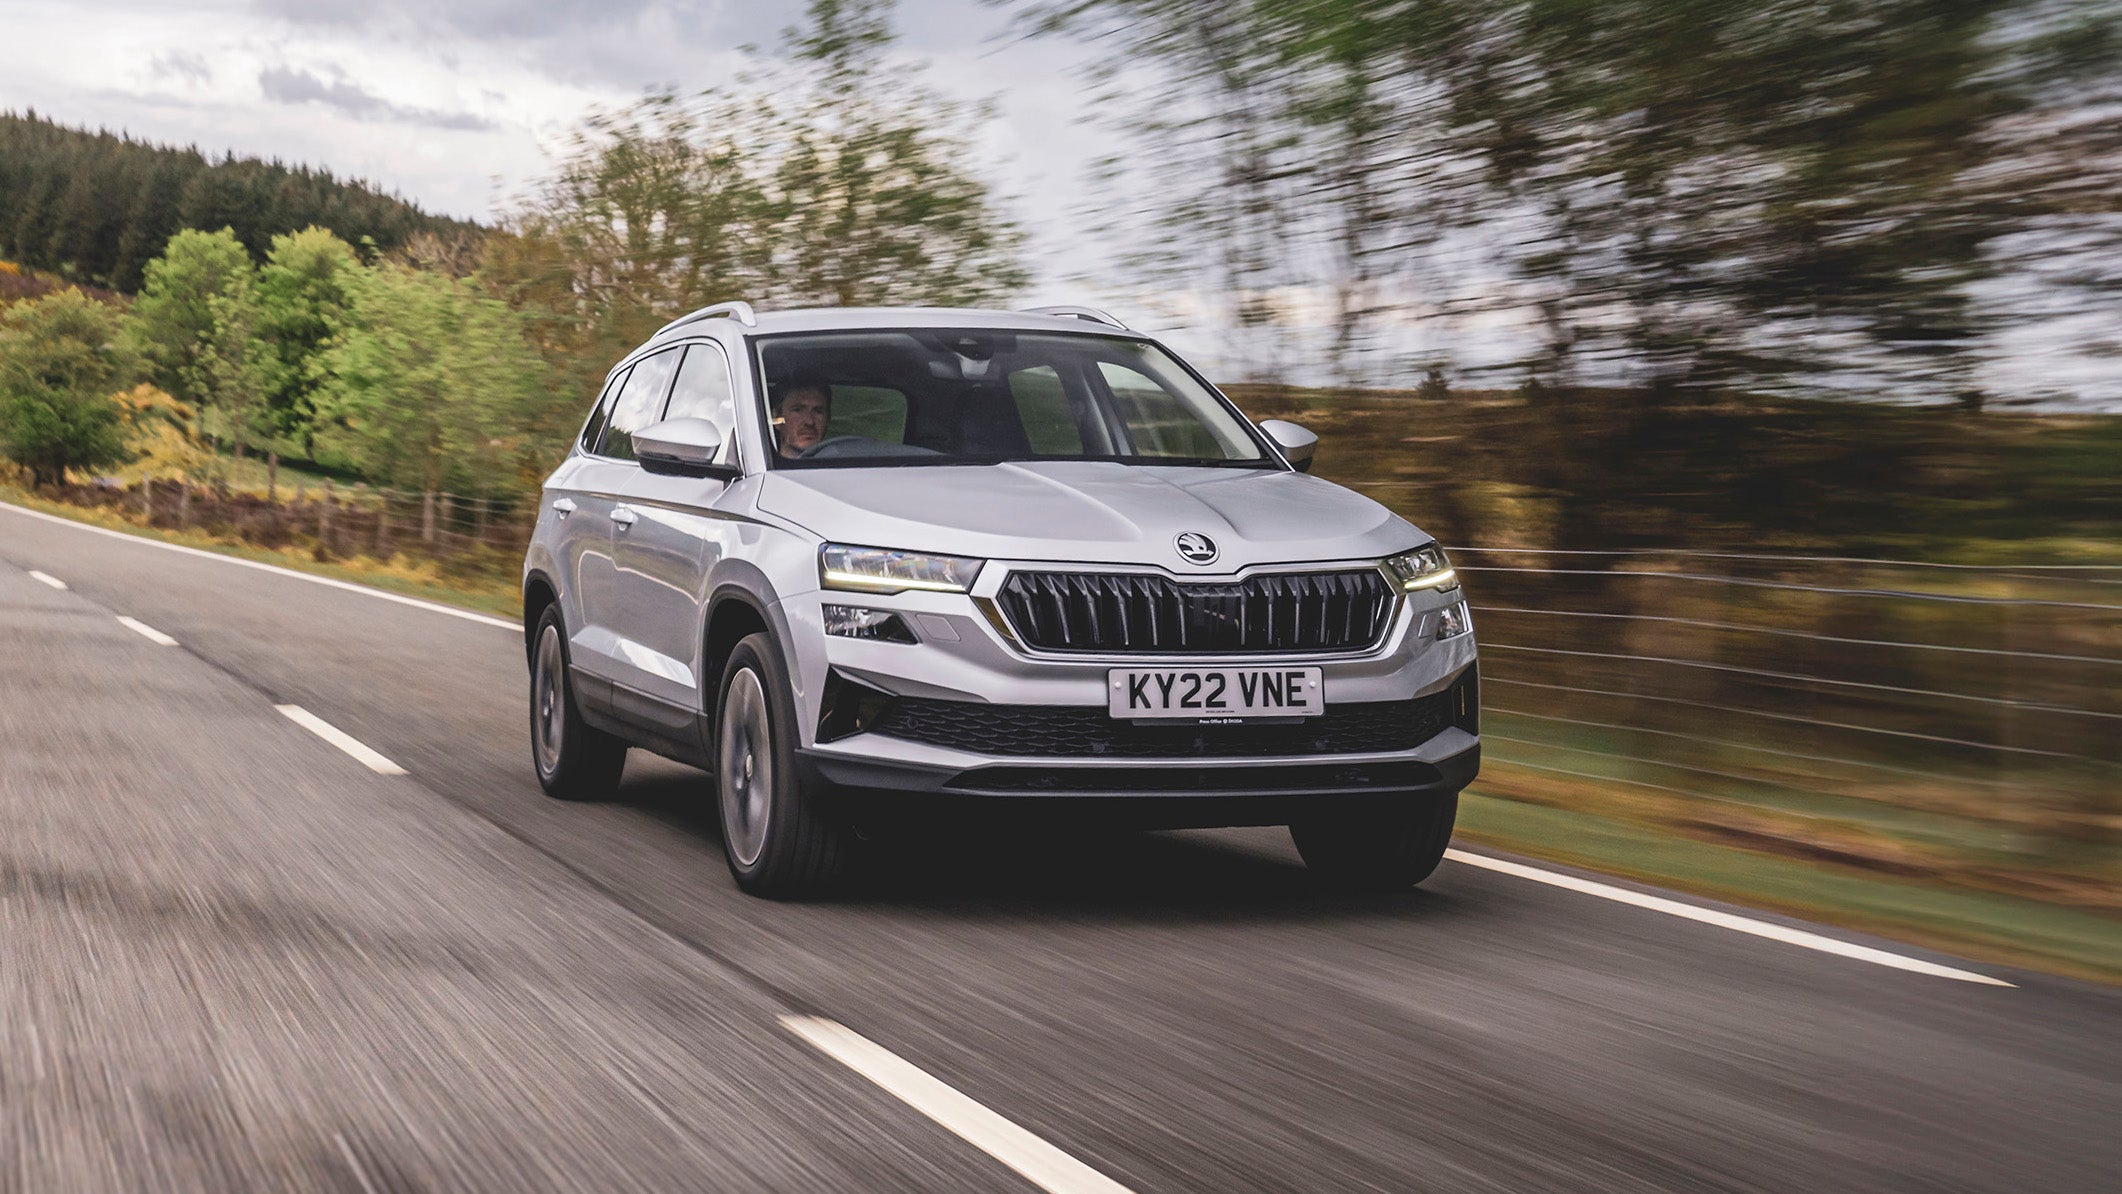 Skoda Karoq Review, Price and Specification